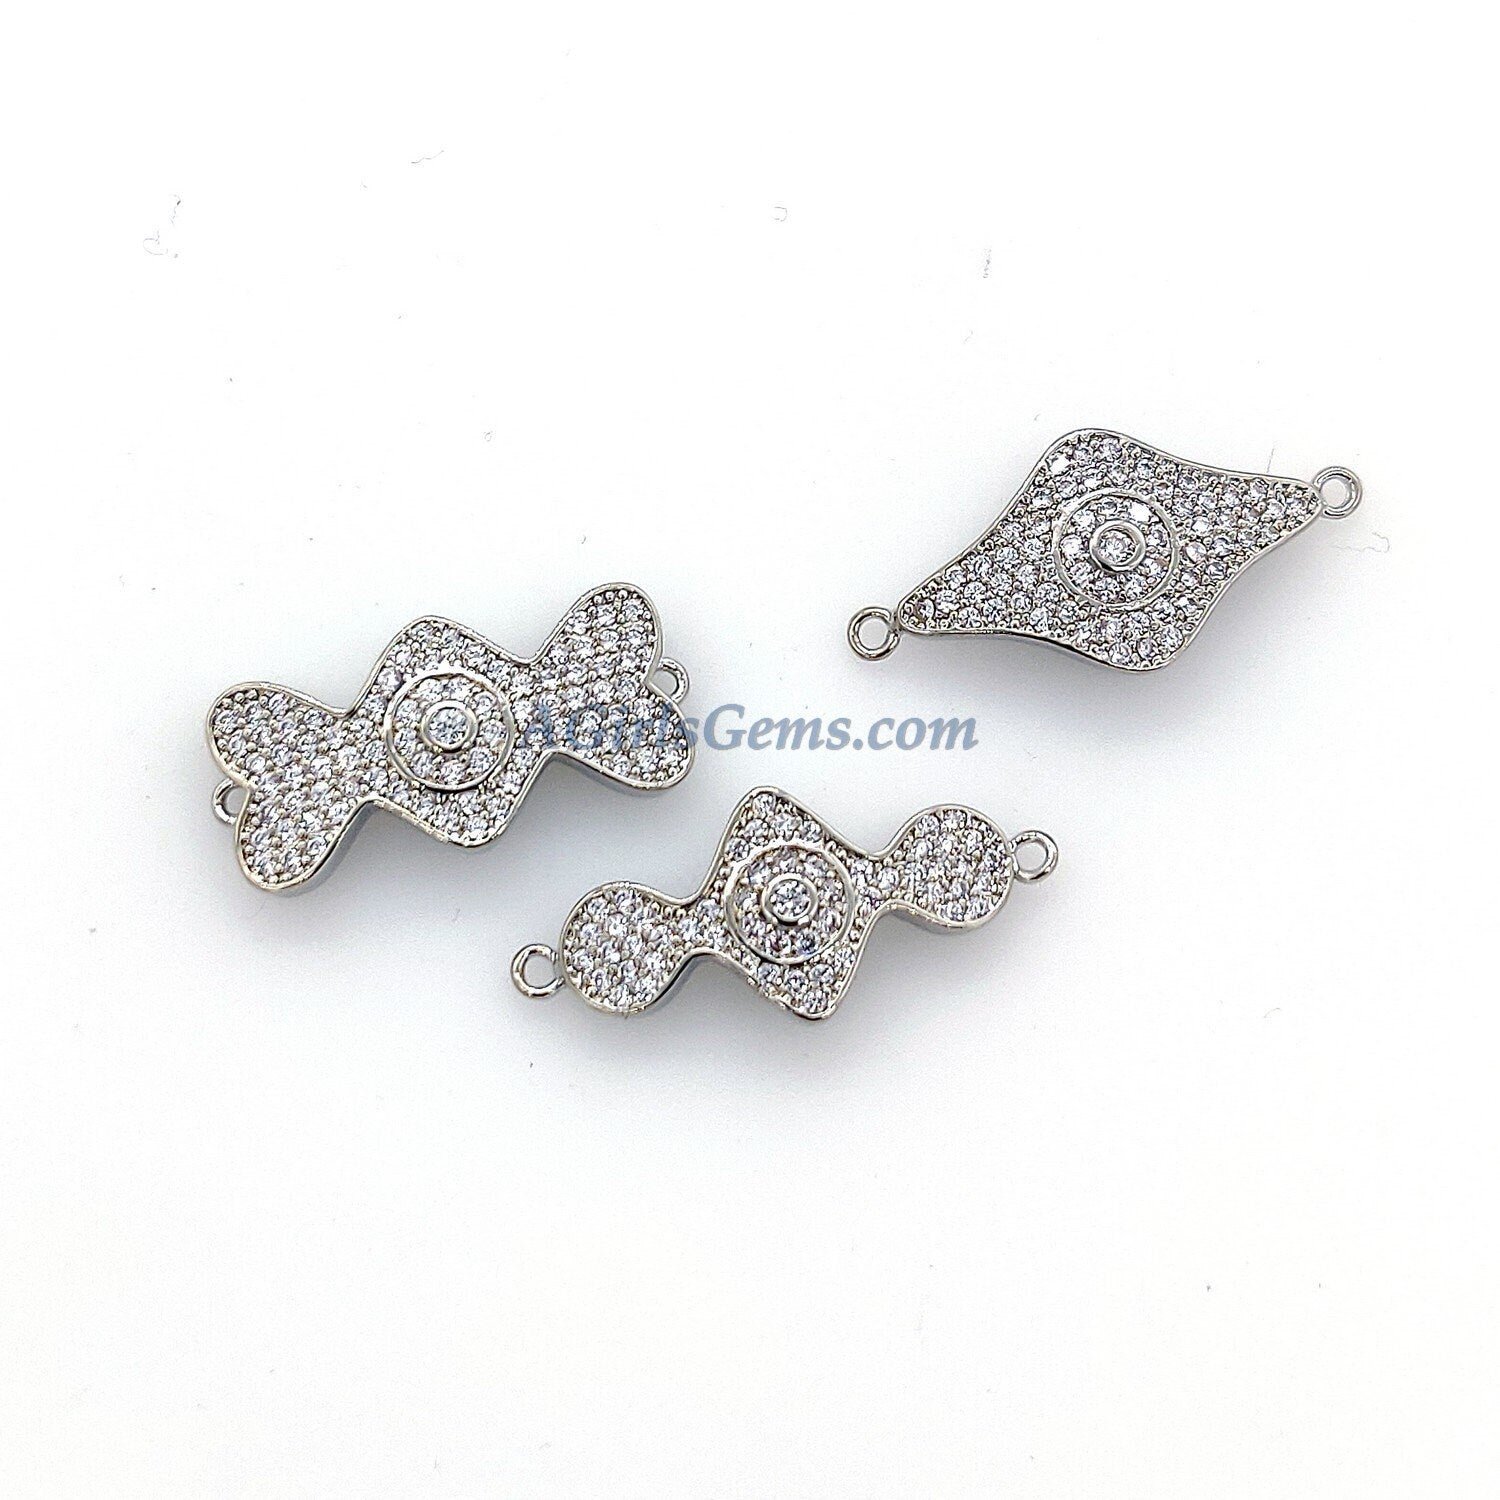 CZ Micro Pave Curved Bracelet Connectors, Silver Rhodium Plated Evil Eye #76, Linking Charms for Dainty/Rosary Chains